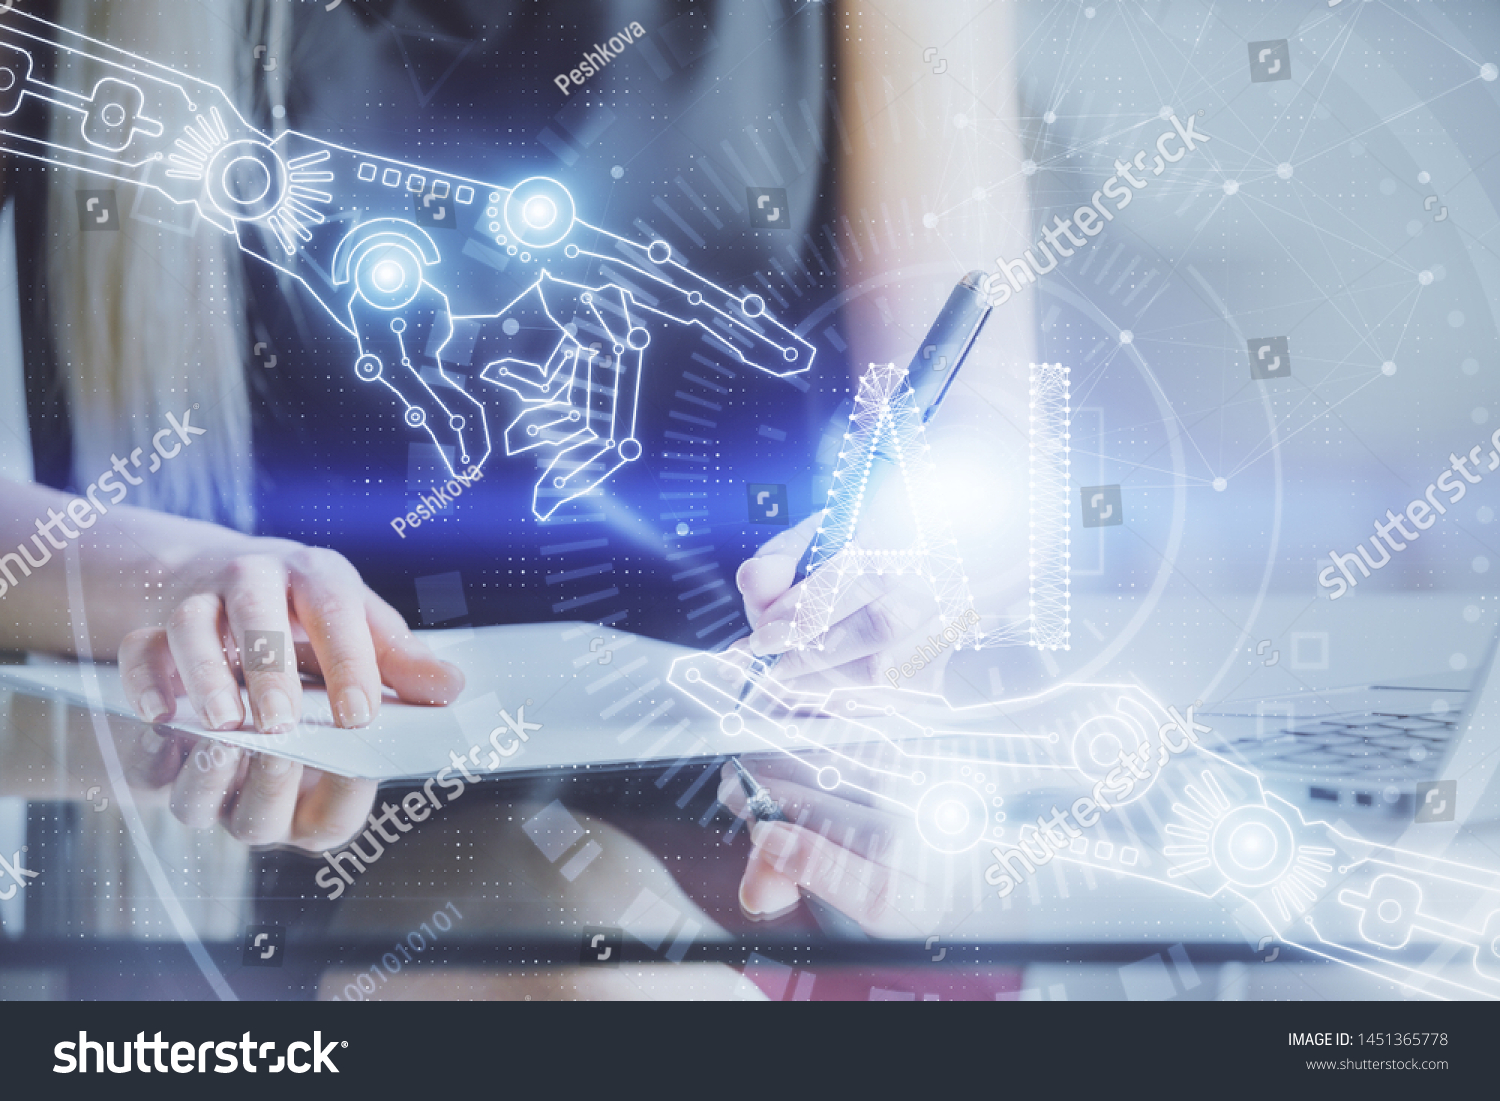 Double exposure of woman's writing hand on background with data technology hud. Big data concept. #1451365778